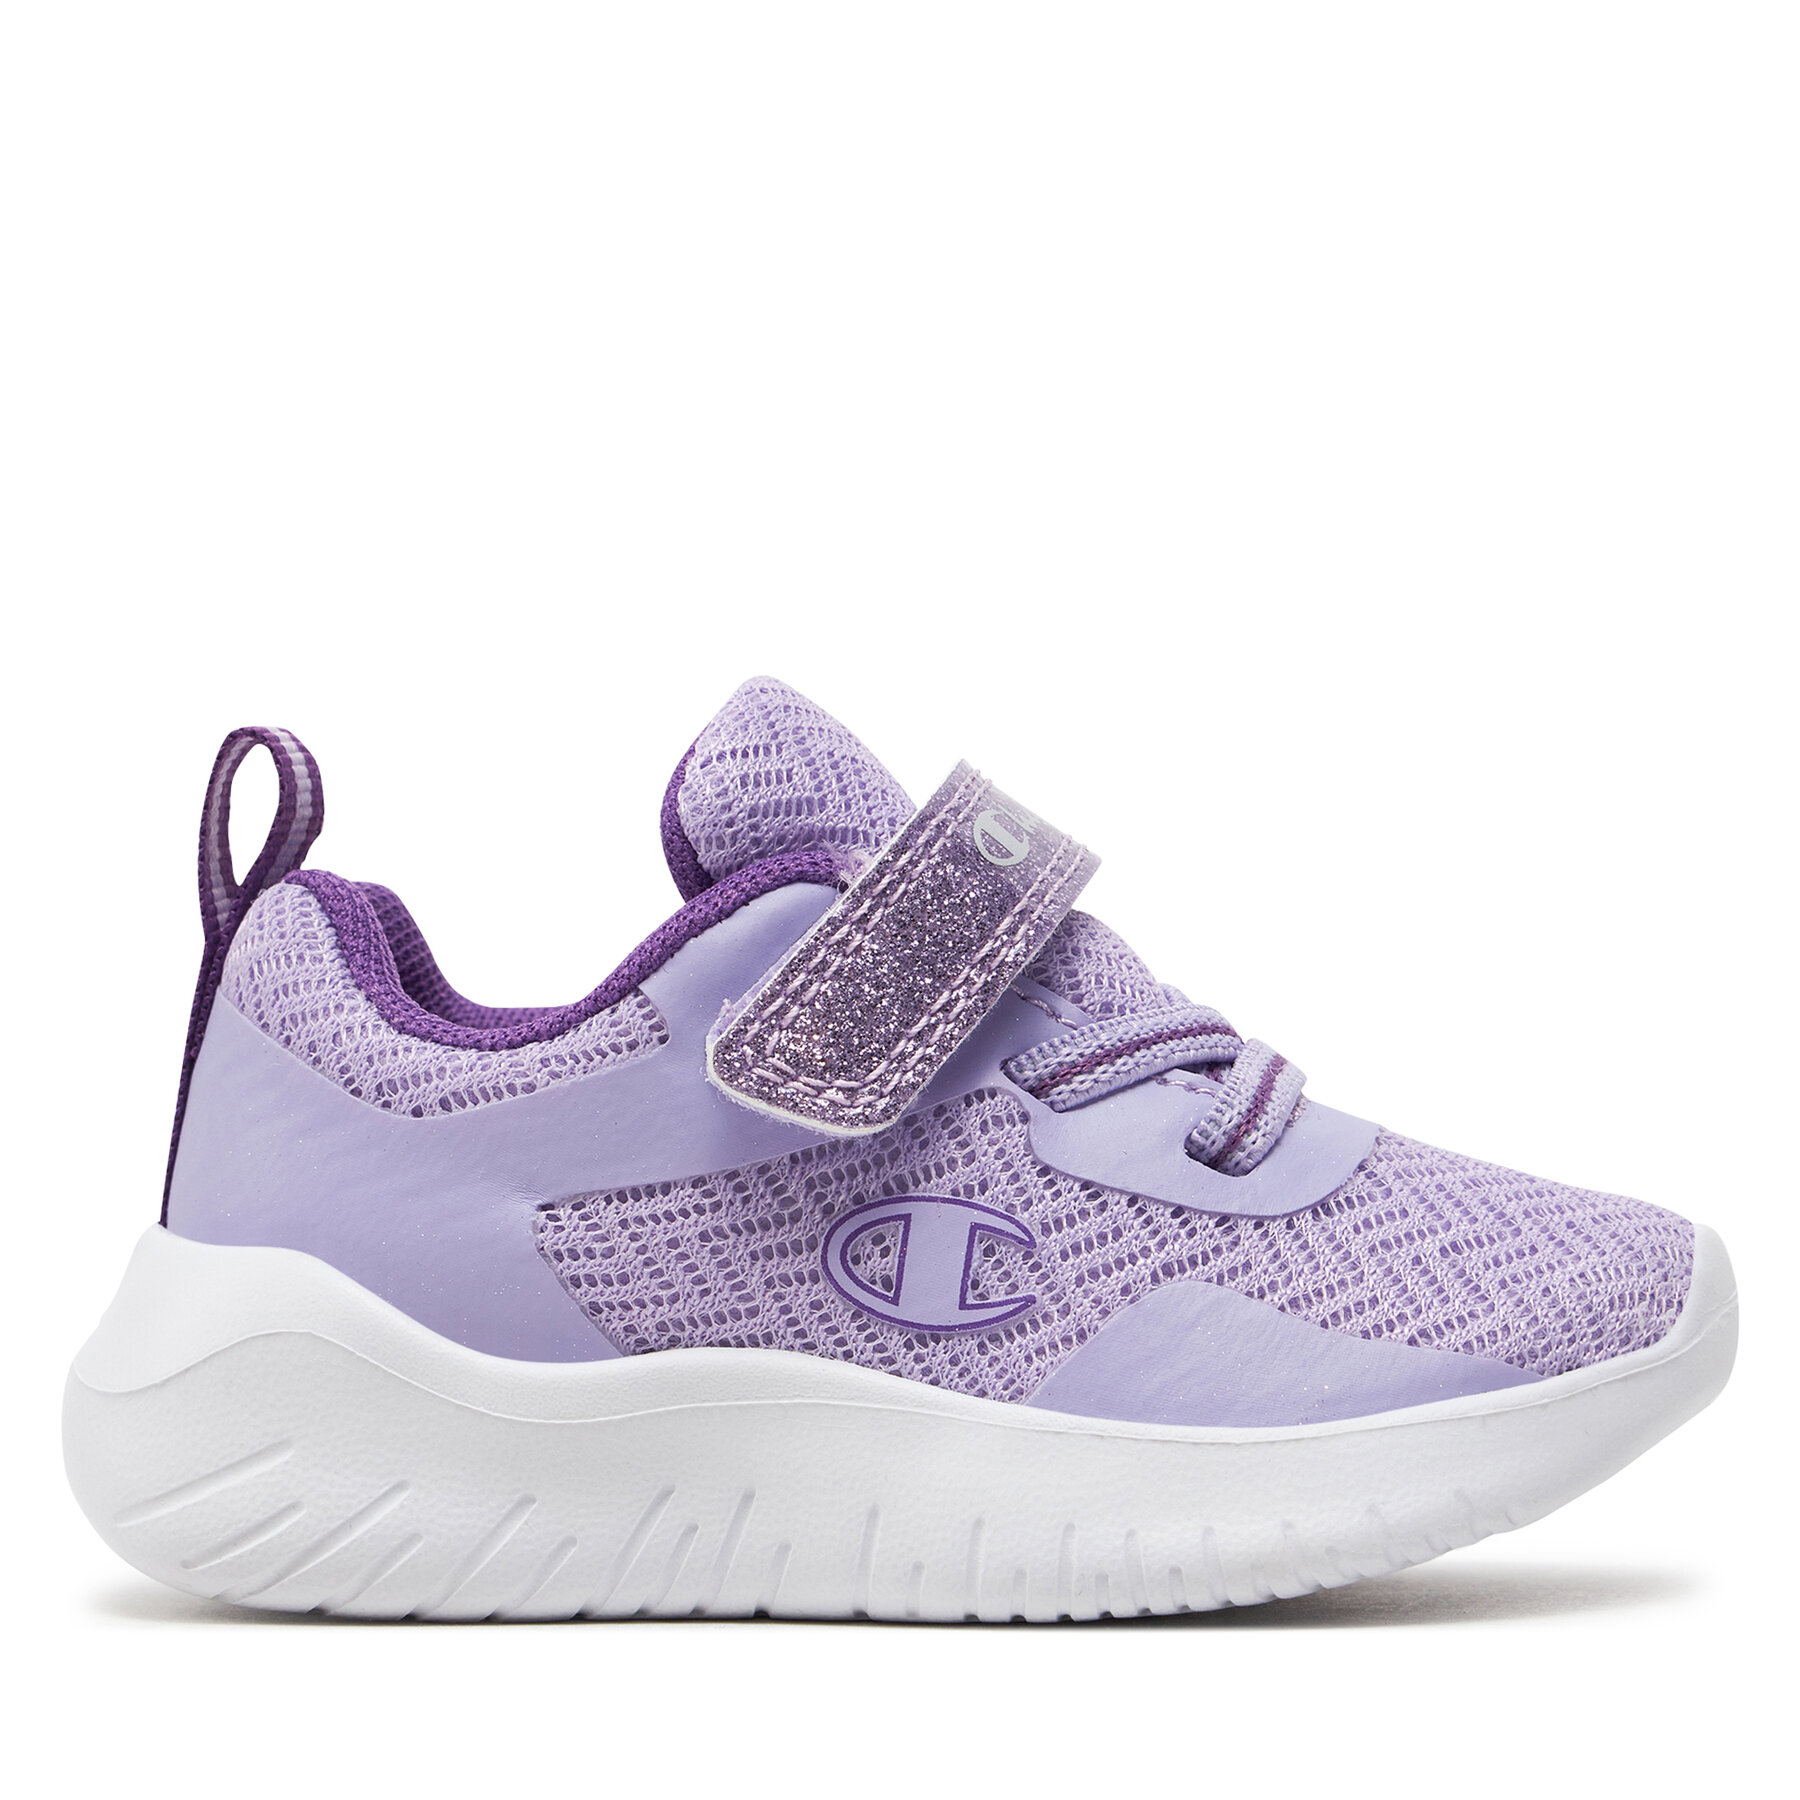 Sneakers Champion Softy Evolve G Td Low Cut Shoe S32531-CHA-VS023 Lilac von Champion